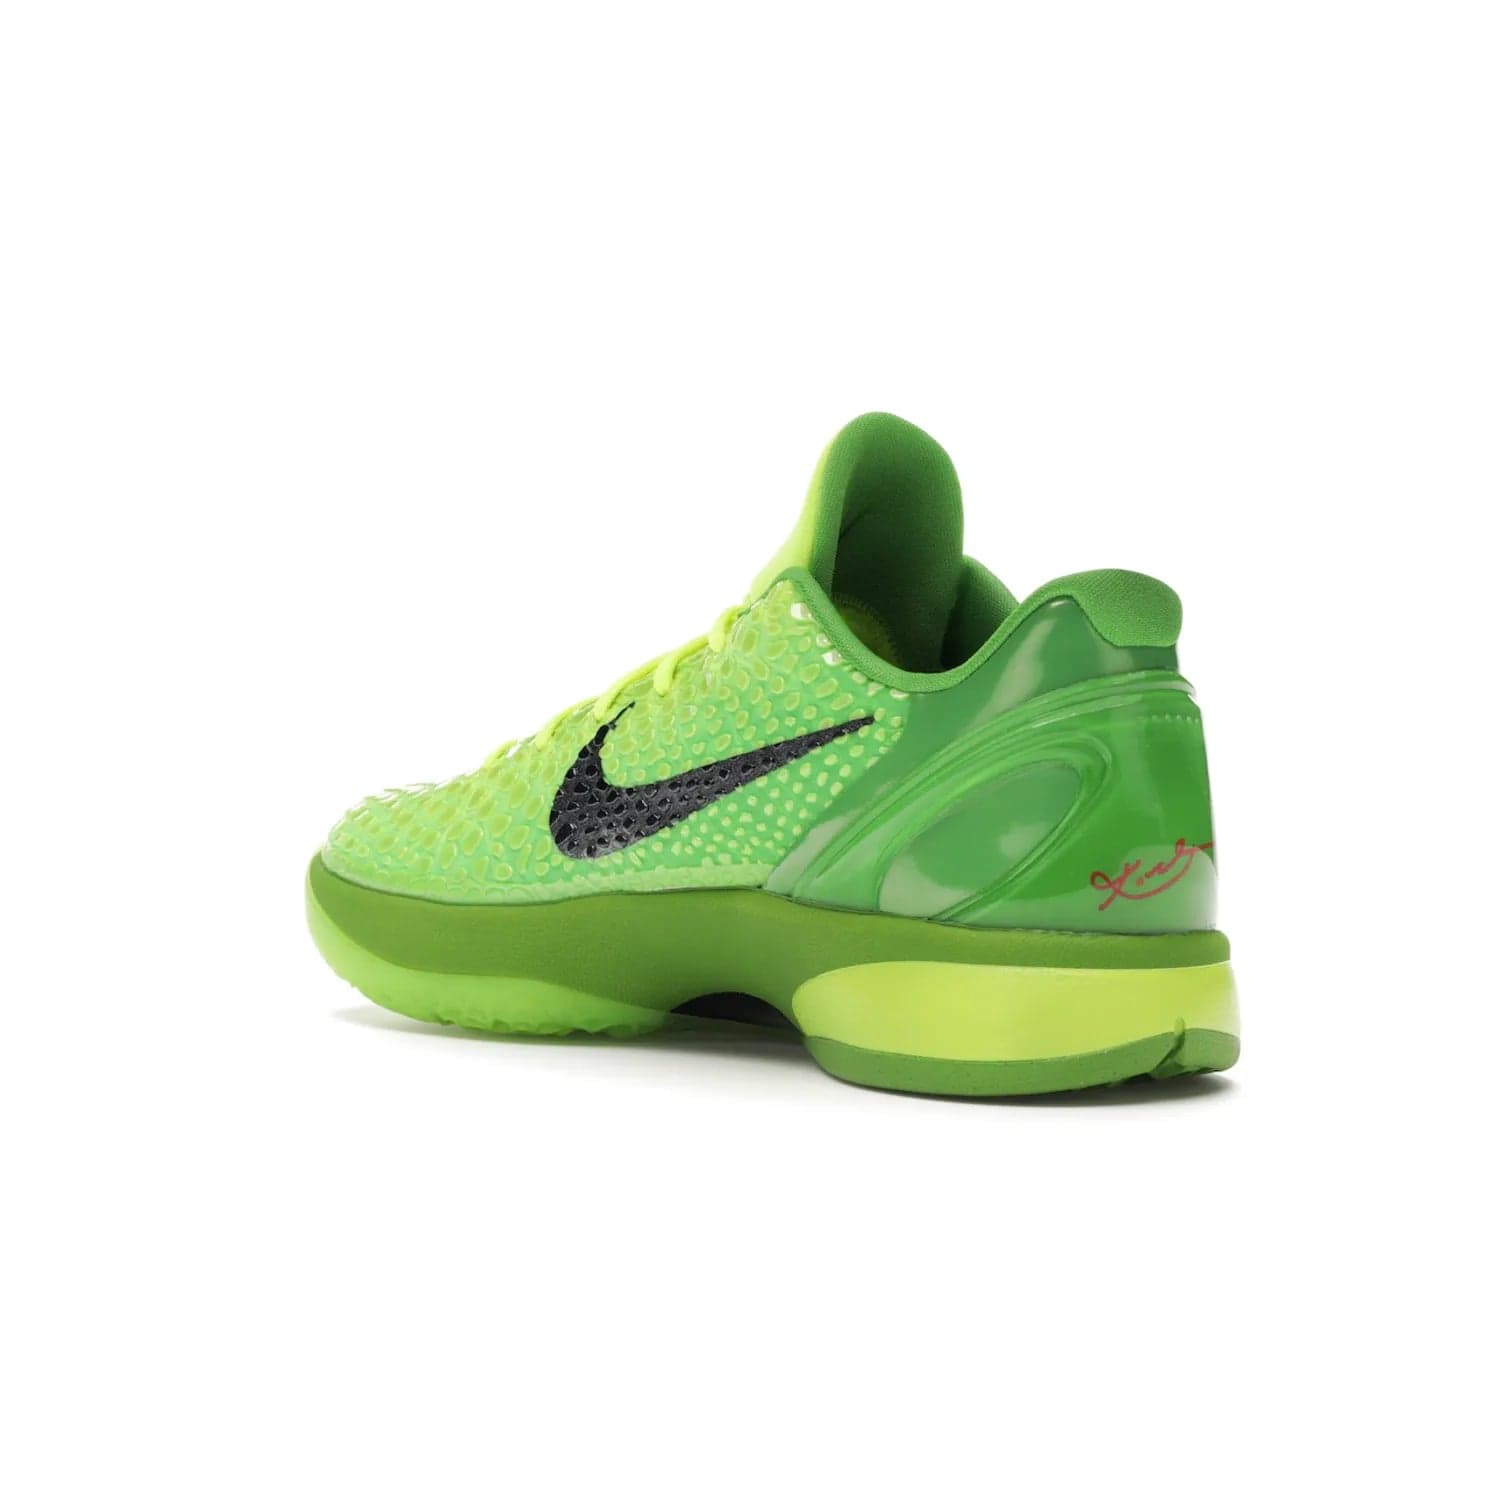 Nike Kobe 6 Protro Grinch (2020) - Image 24 - Only at www.BallersClubKickz.com - #
The Nike Kobe 6 Protro Grinch updates the iconic 2011 design with modern tech like a Zoom Air cushioning system, scaled-down traction, and updated silhouette. Experience the textured Green Apple and Volt upper plus bright red and green accents for $180.